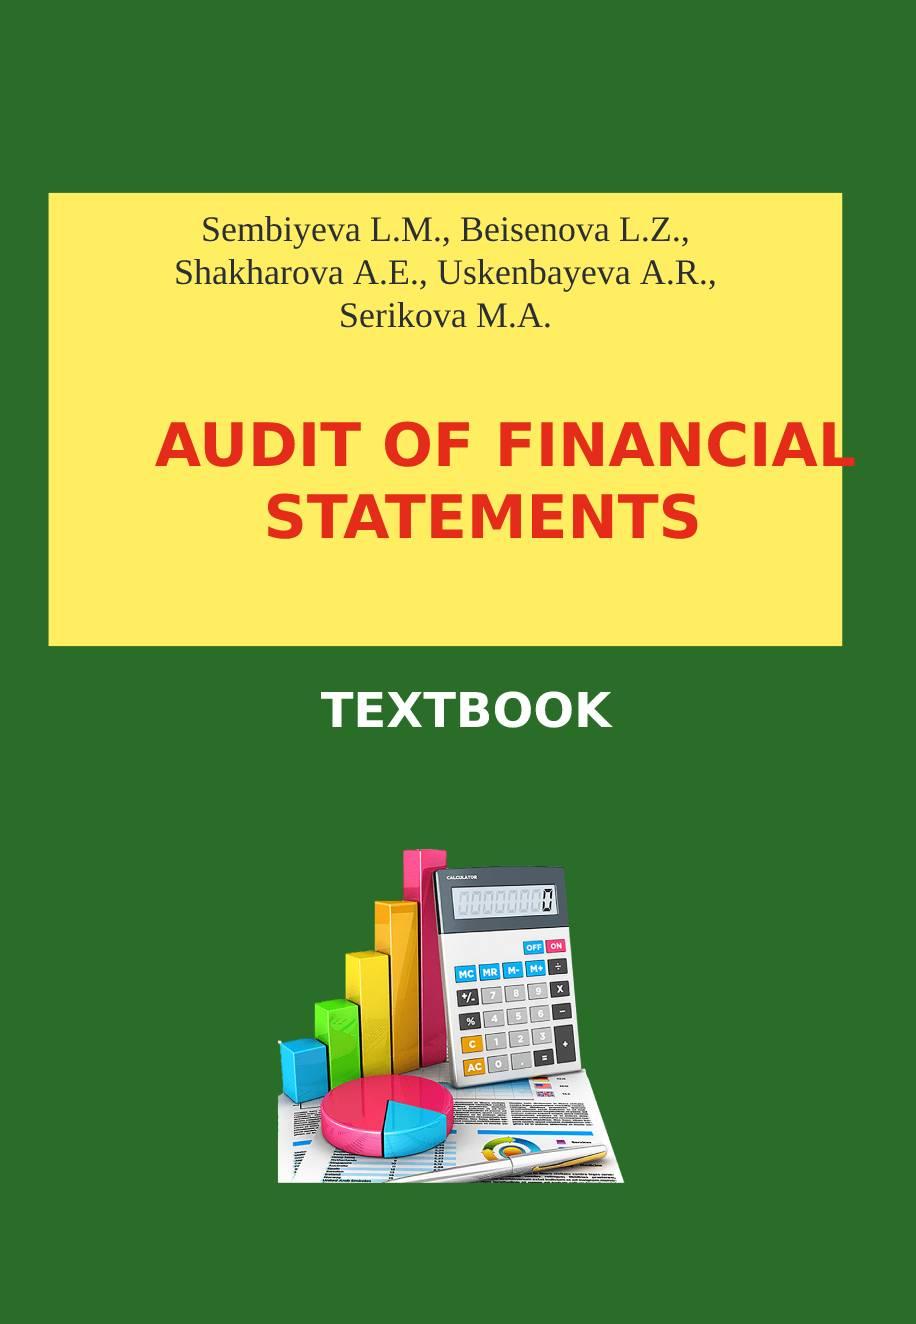 Audit of financial statements: Textbook.